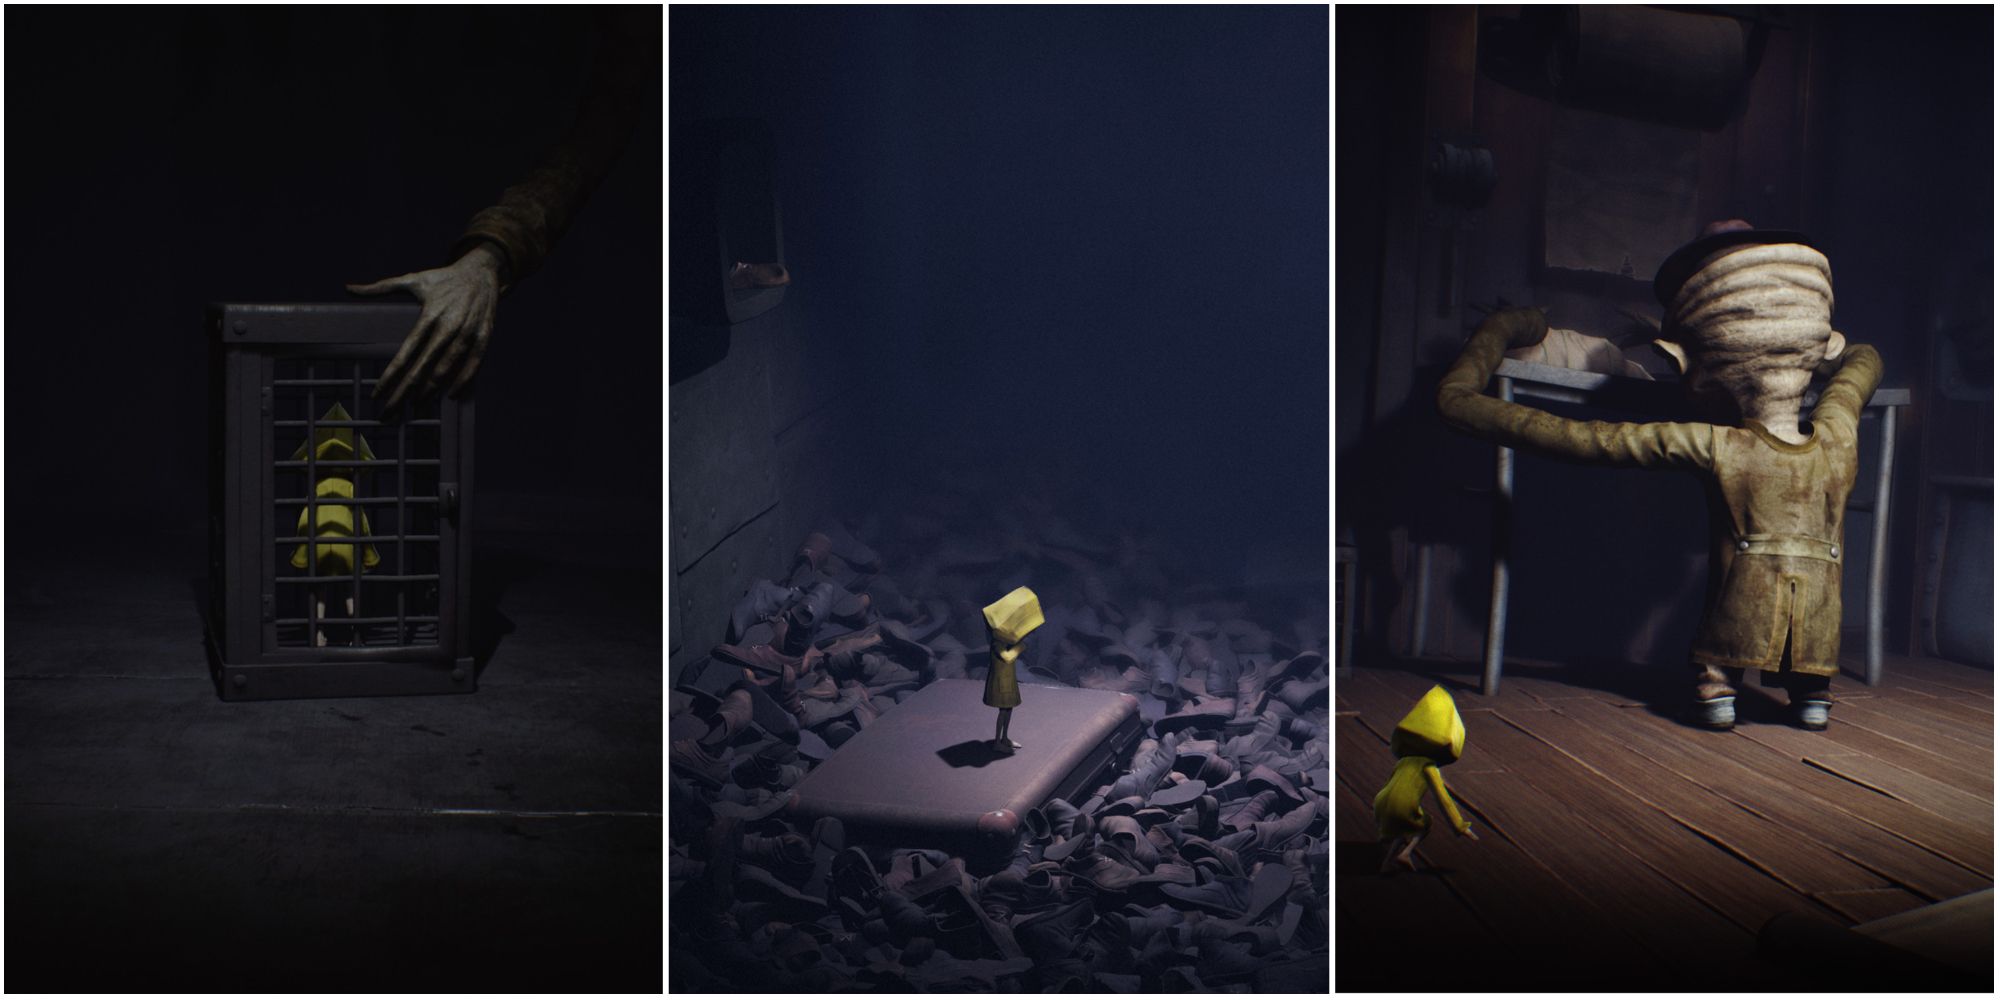 Little Nightmares - Complete Guide (with Achievements, Ending and